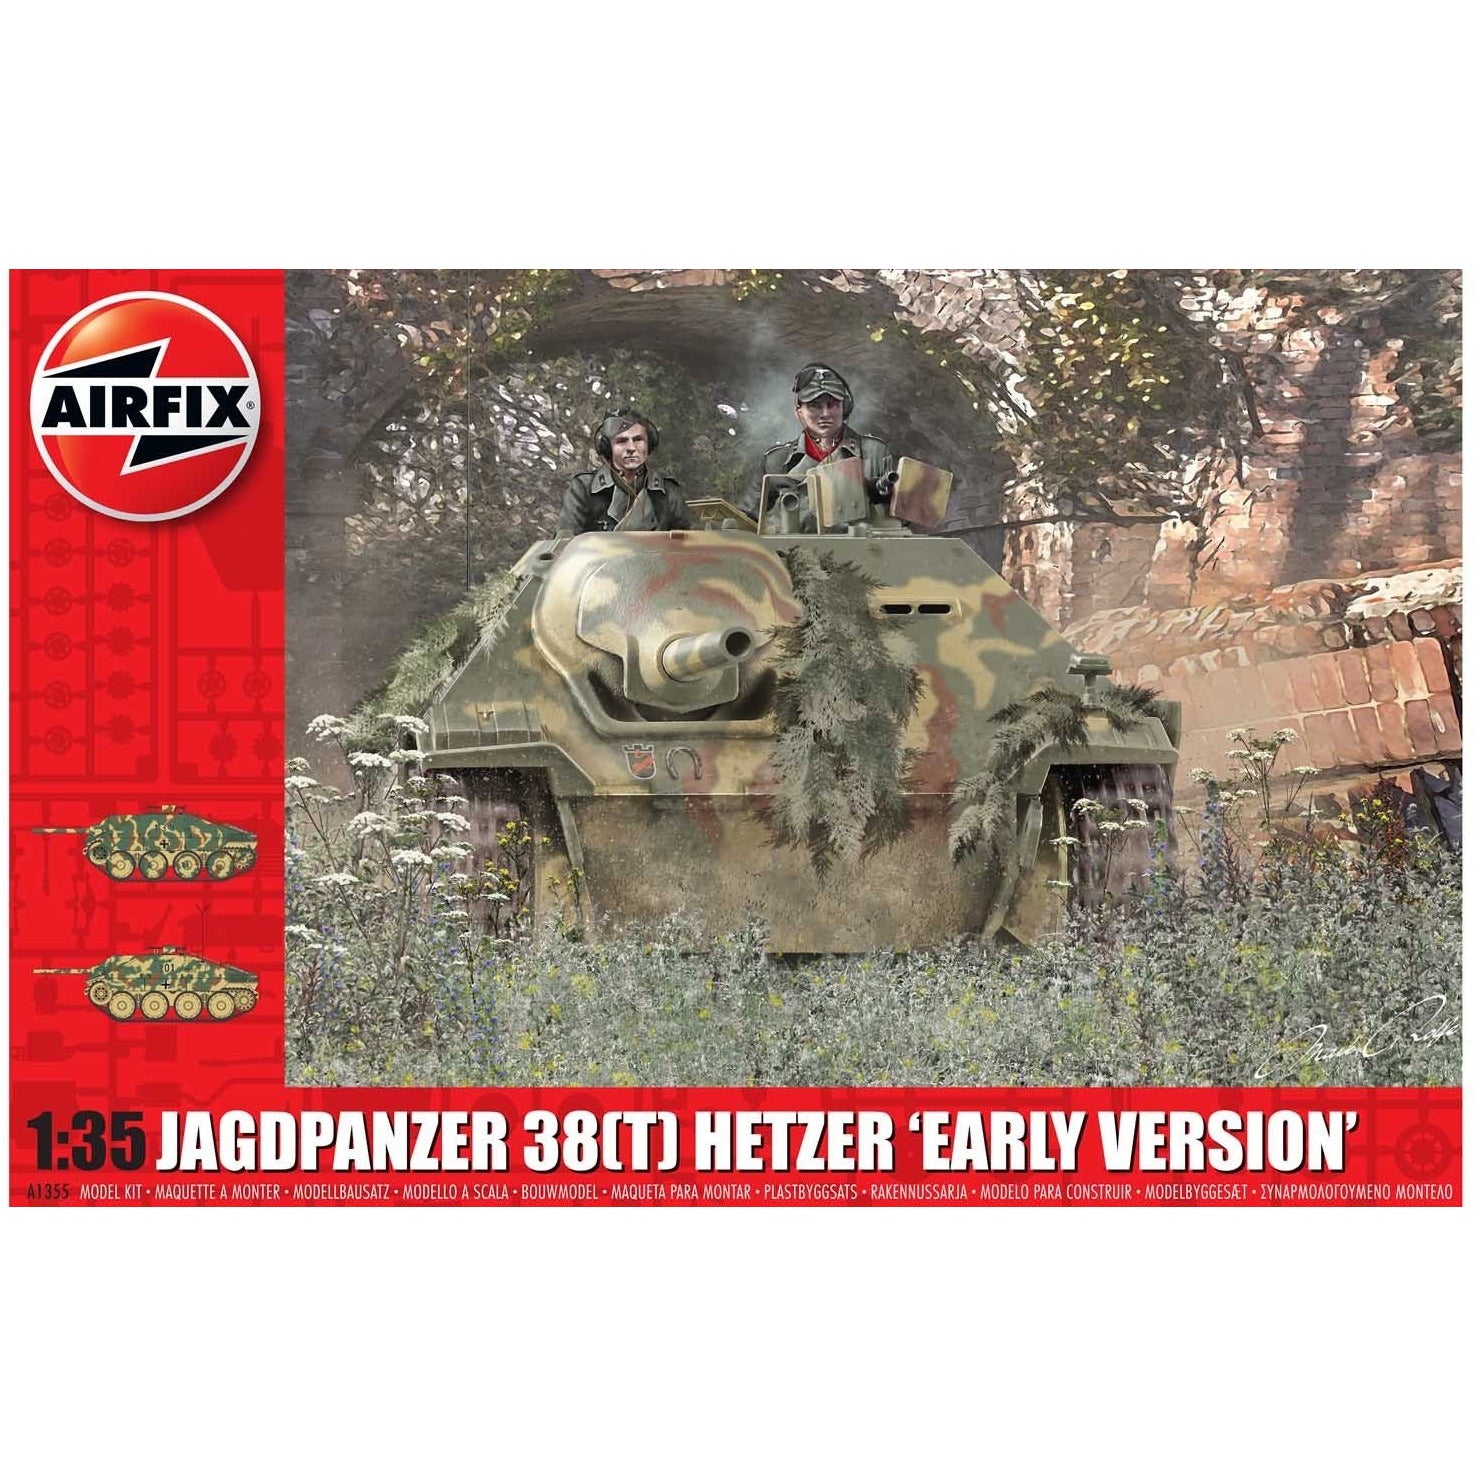 Jagdpanzer 38(T) Hetzer Early Version 1/35 #1355 by Airfix